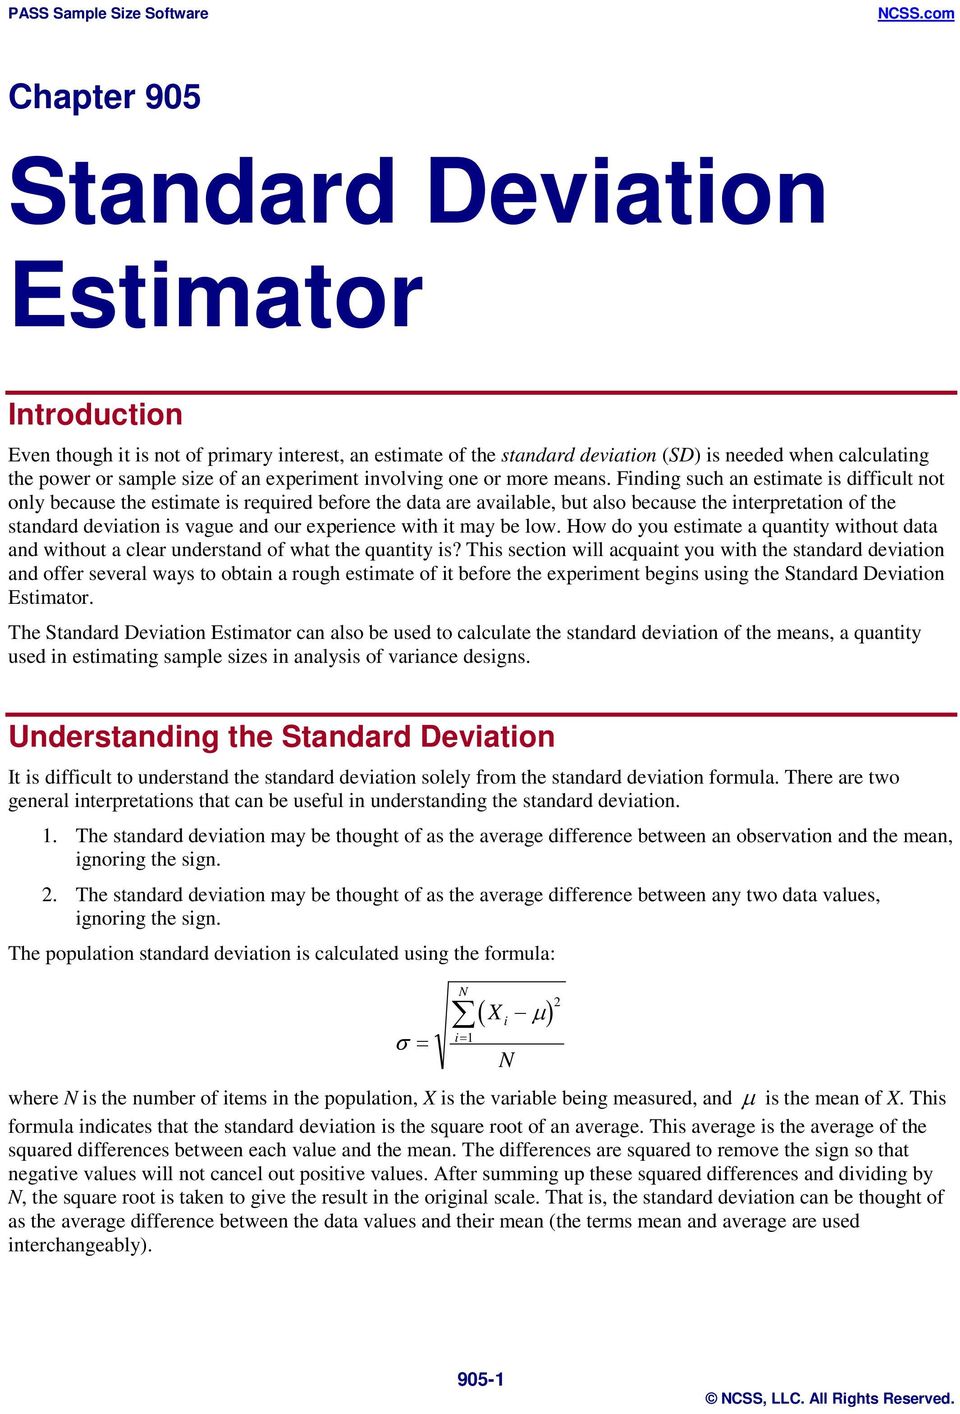 Finding such an estimate is difficult not only because the estimate is required before the data are available, but also because the interpretation of the standard deviation is vague and our